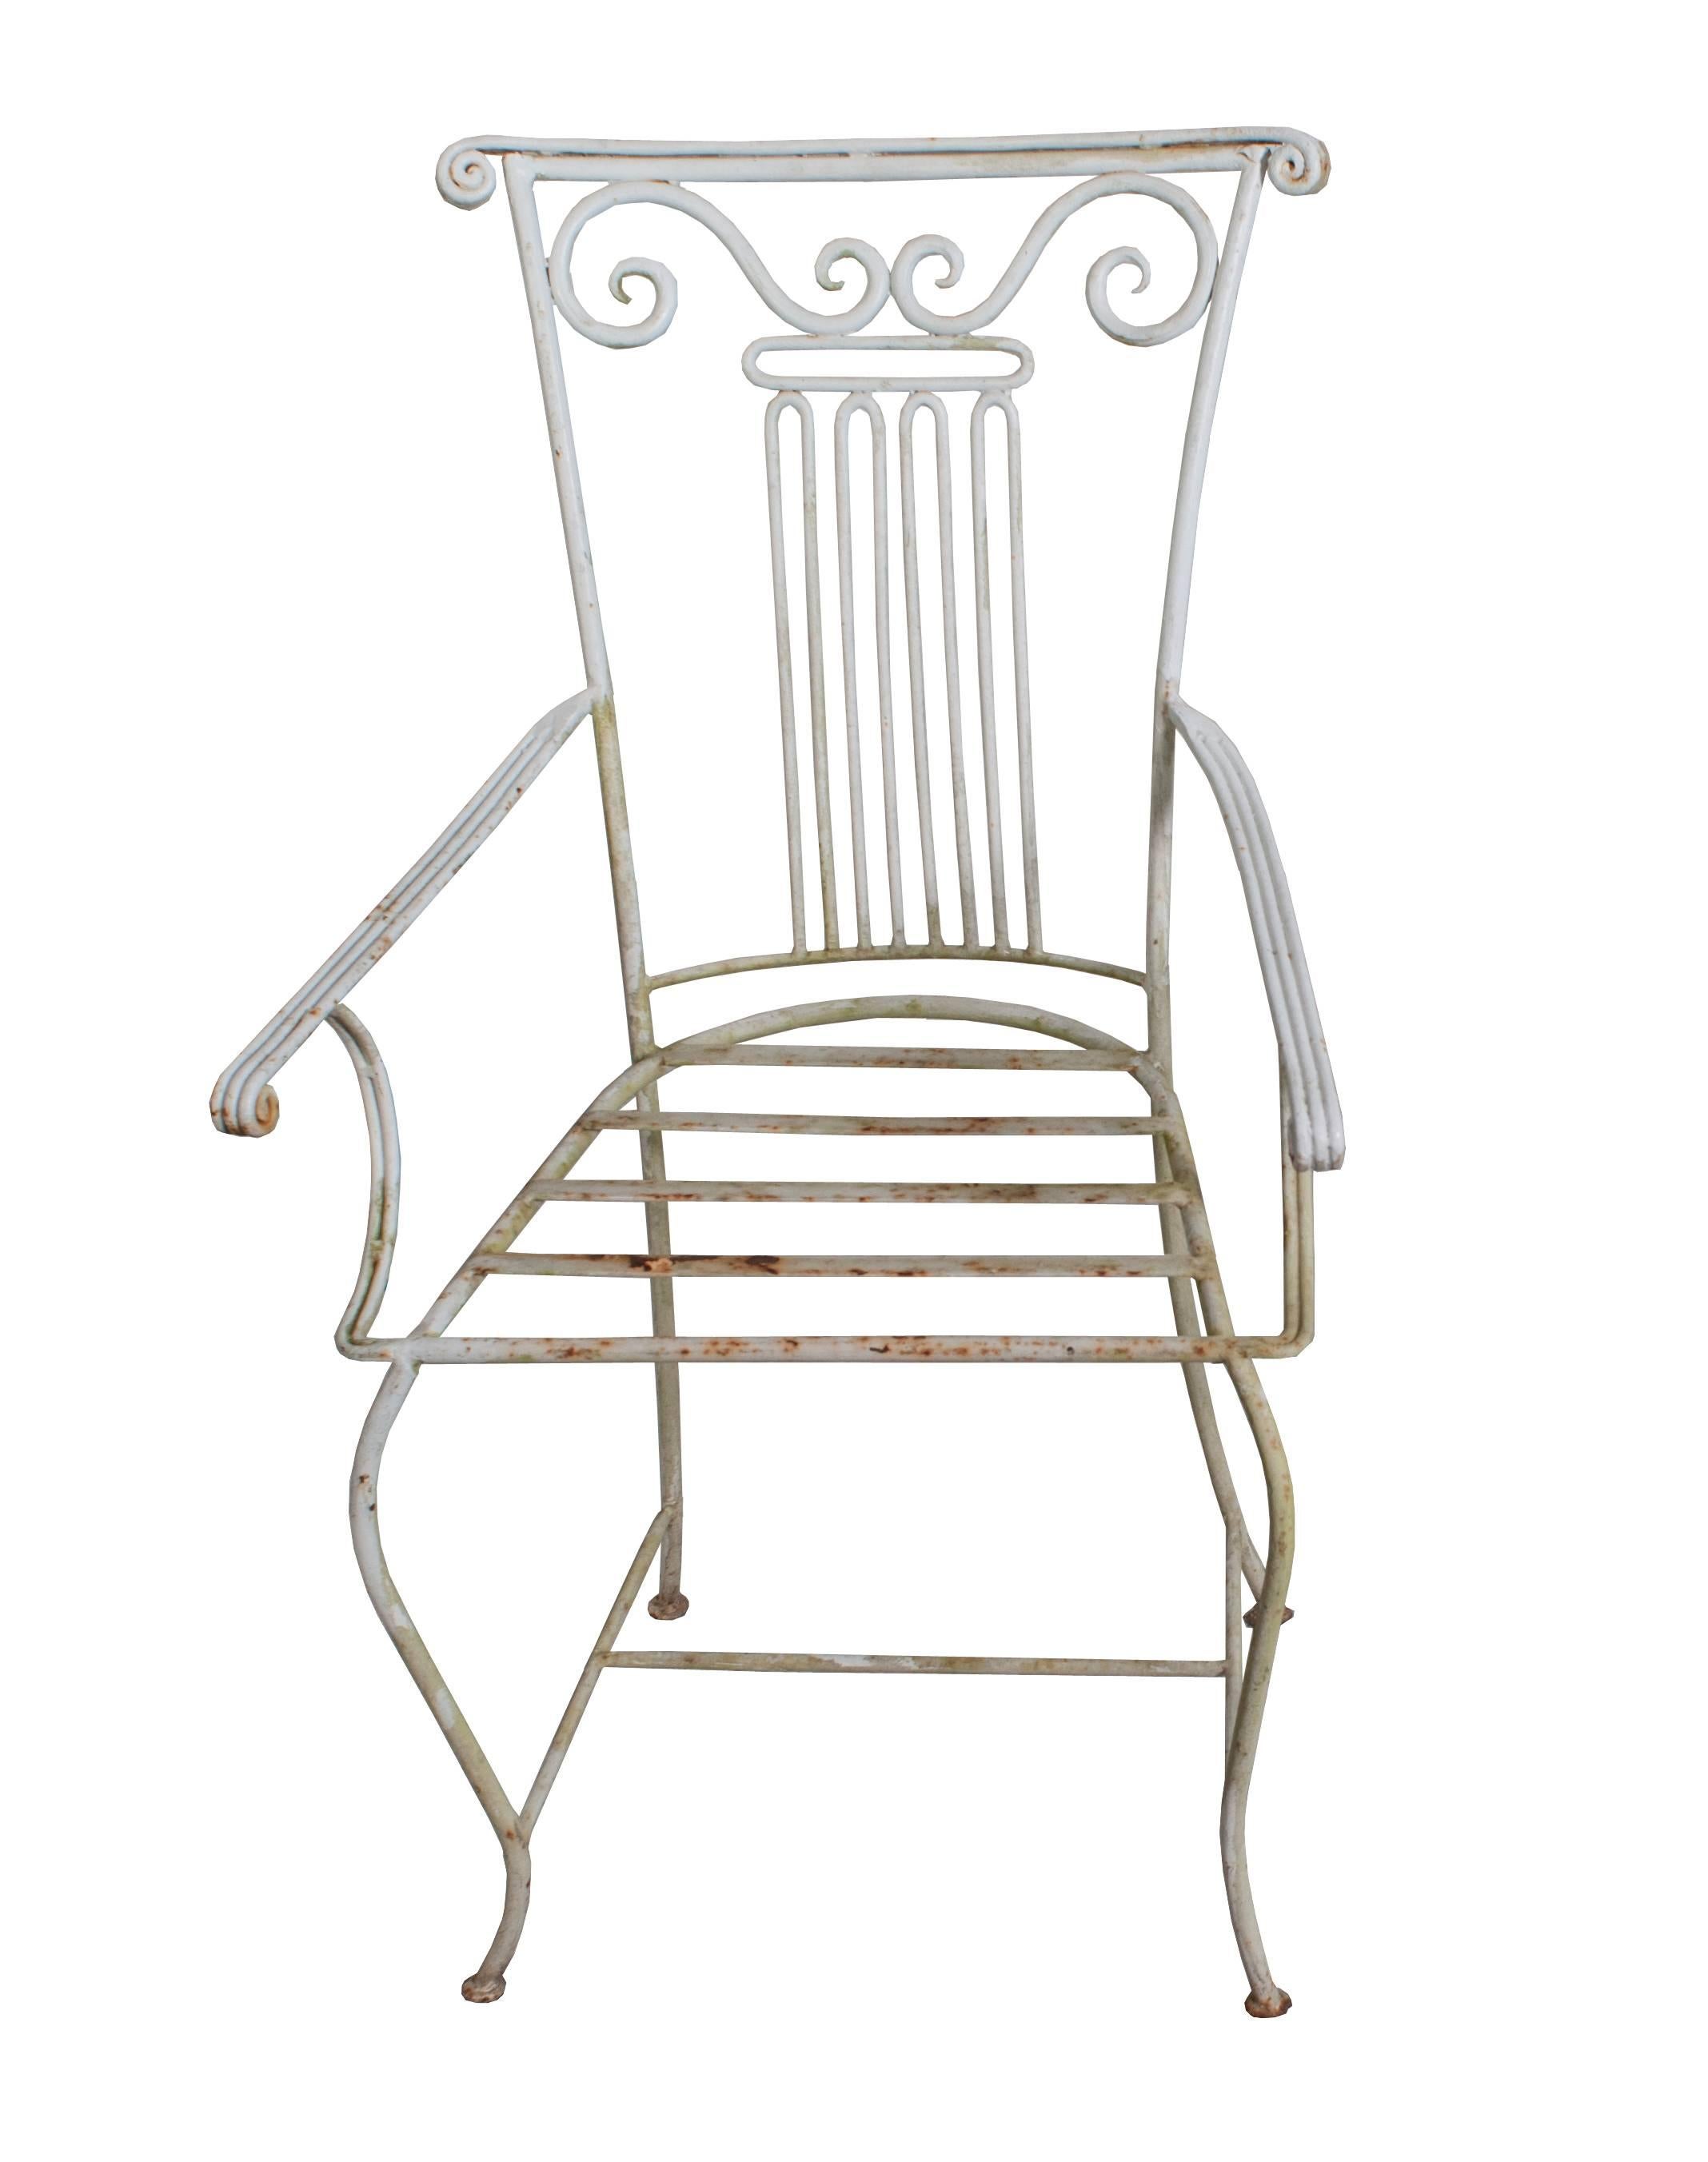 Set of three Neoclassical Wrought Iron Garden Chairs available for purchase individually.  Arm Height 25 inches.